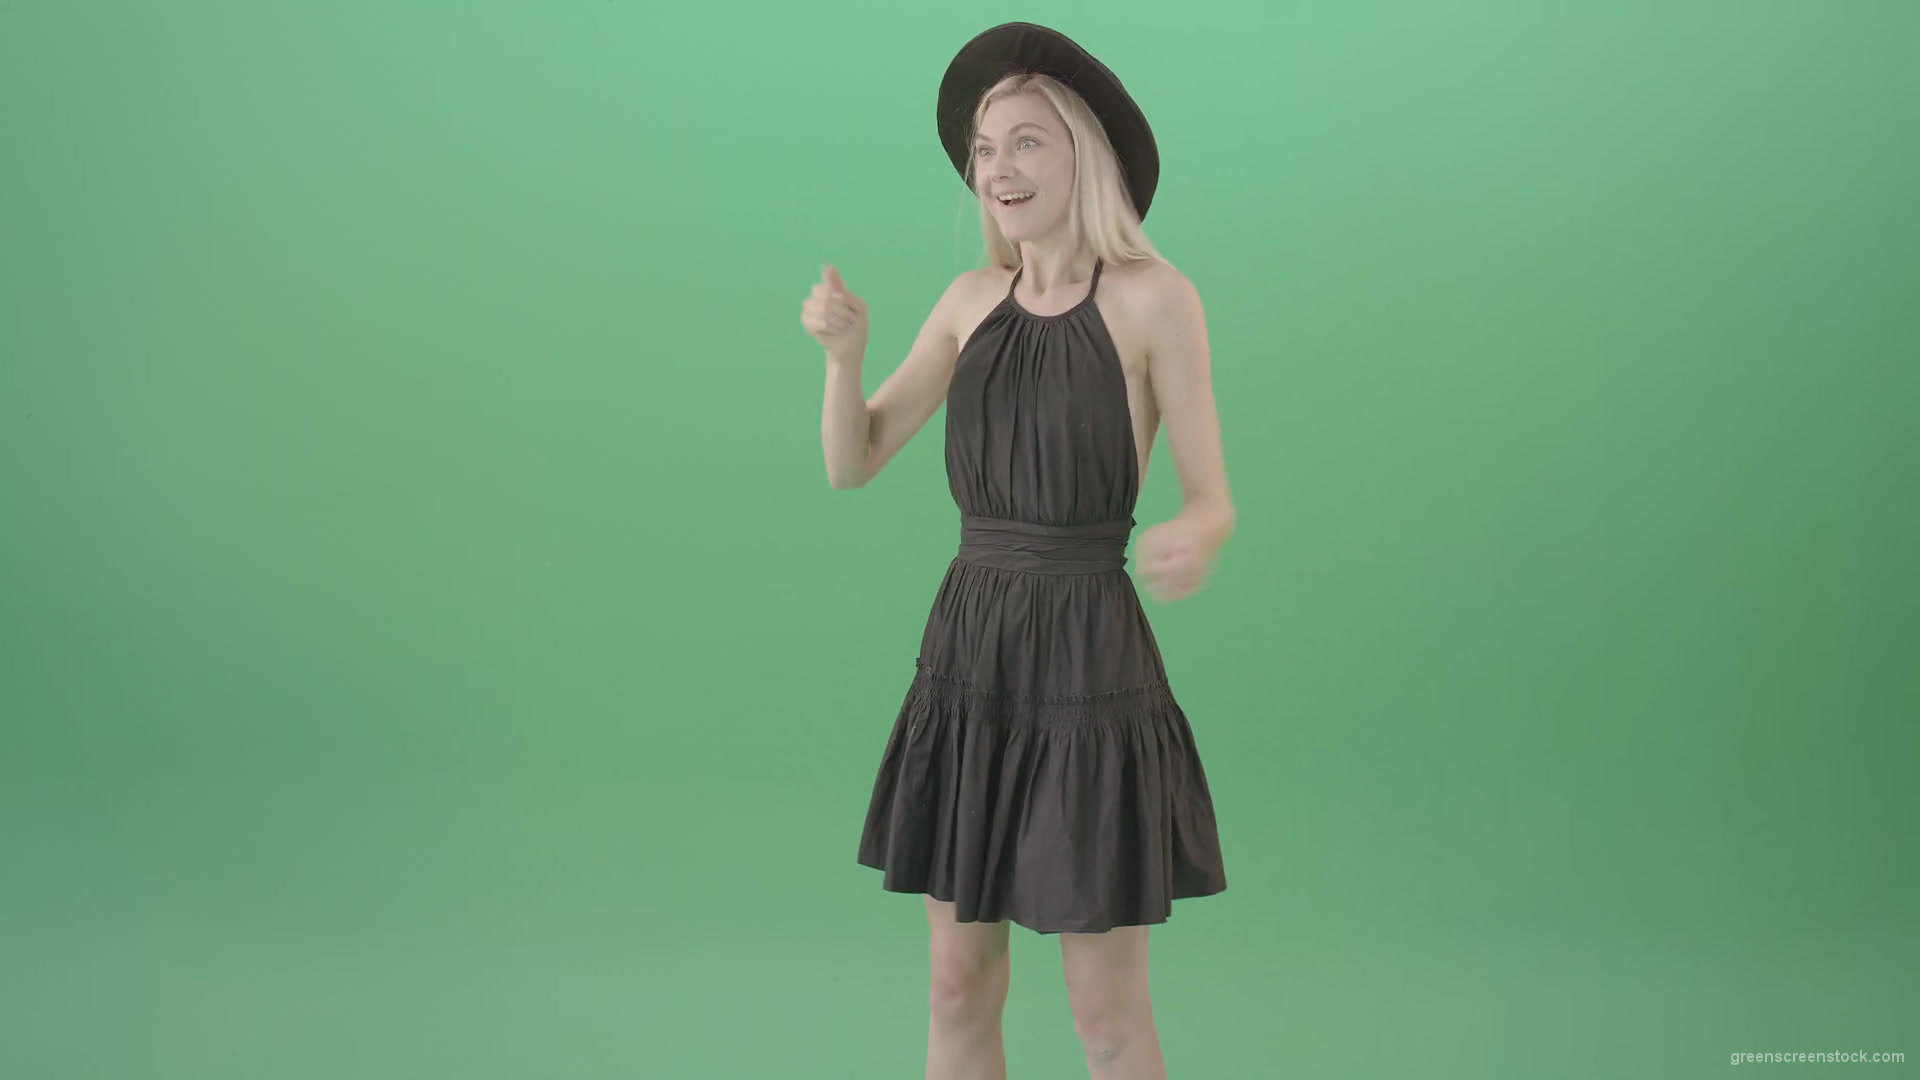 Happy-wow-effect-blonde-girl-slides-products-on-internet-on-touch-screen-4K-Green-Screen-Video-Footage-1920_008 Green Screen Stock